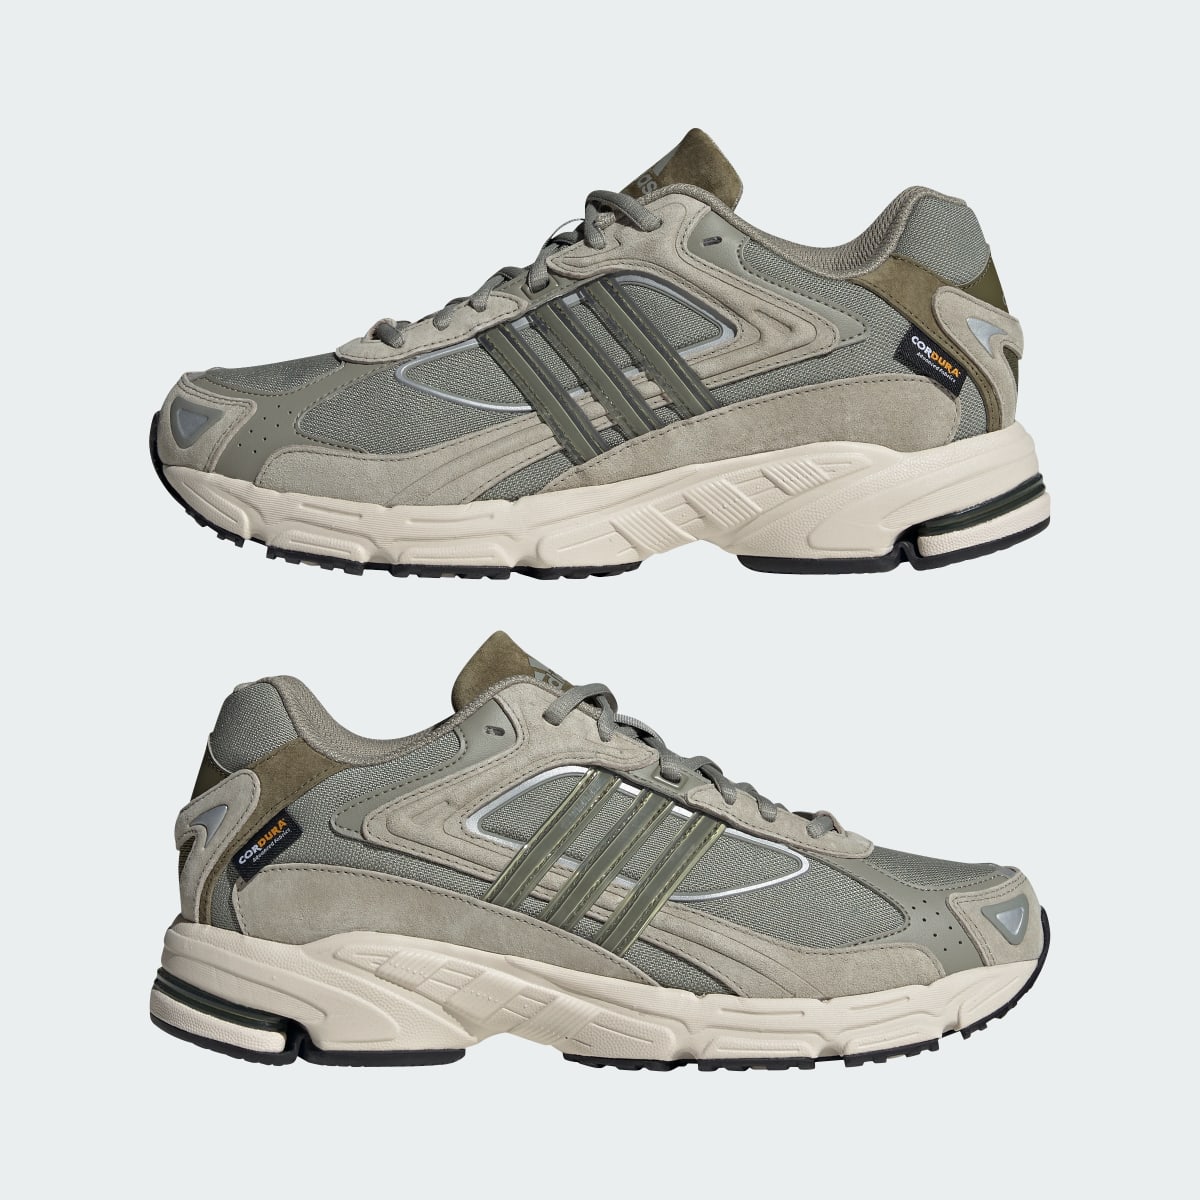 Adidas Chaussure Response CL. 8